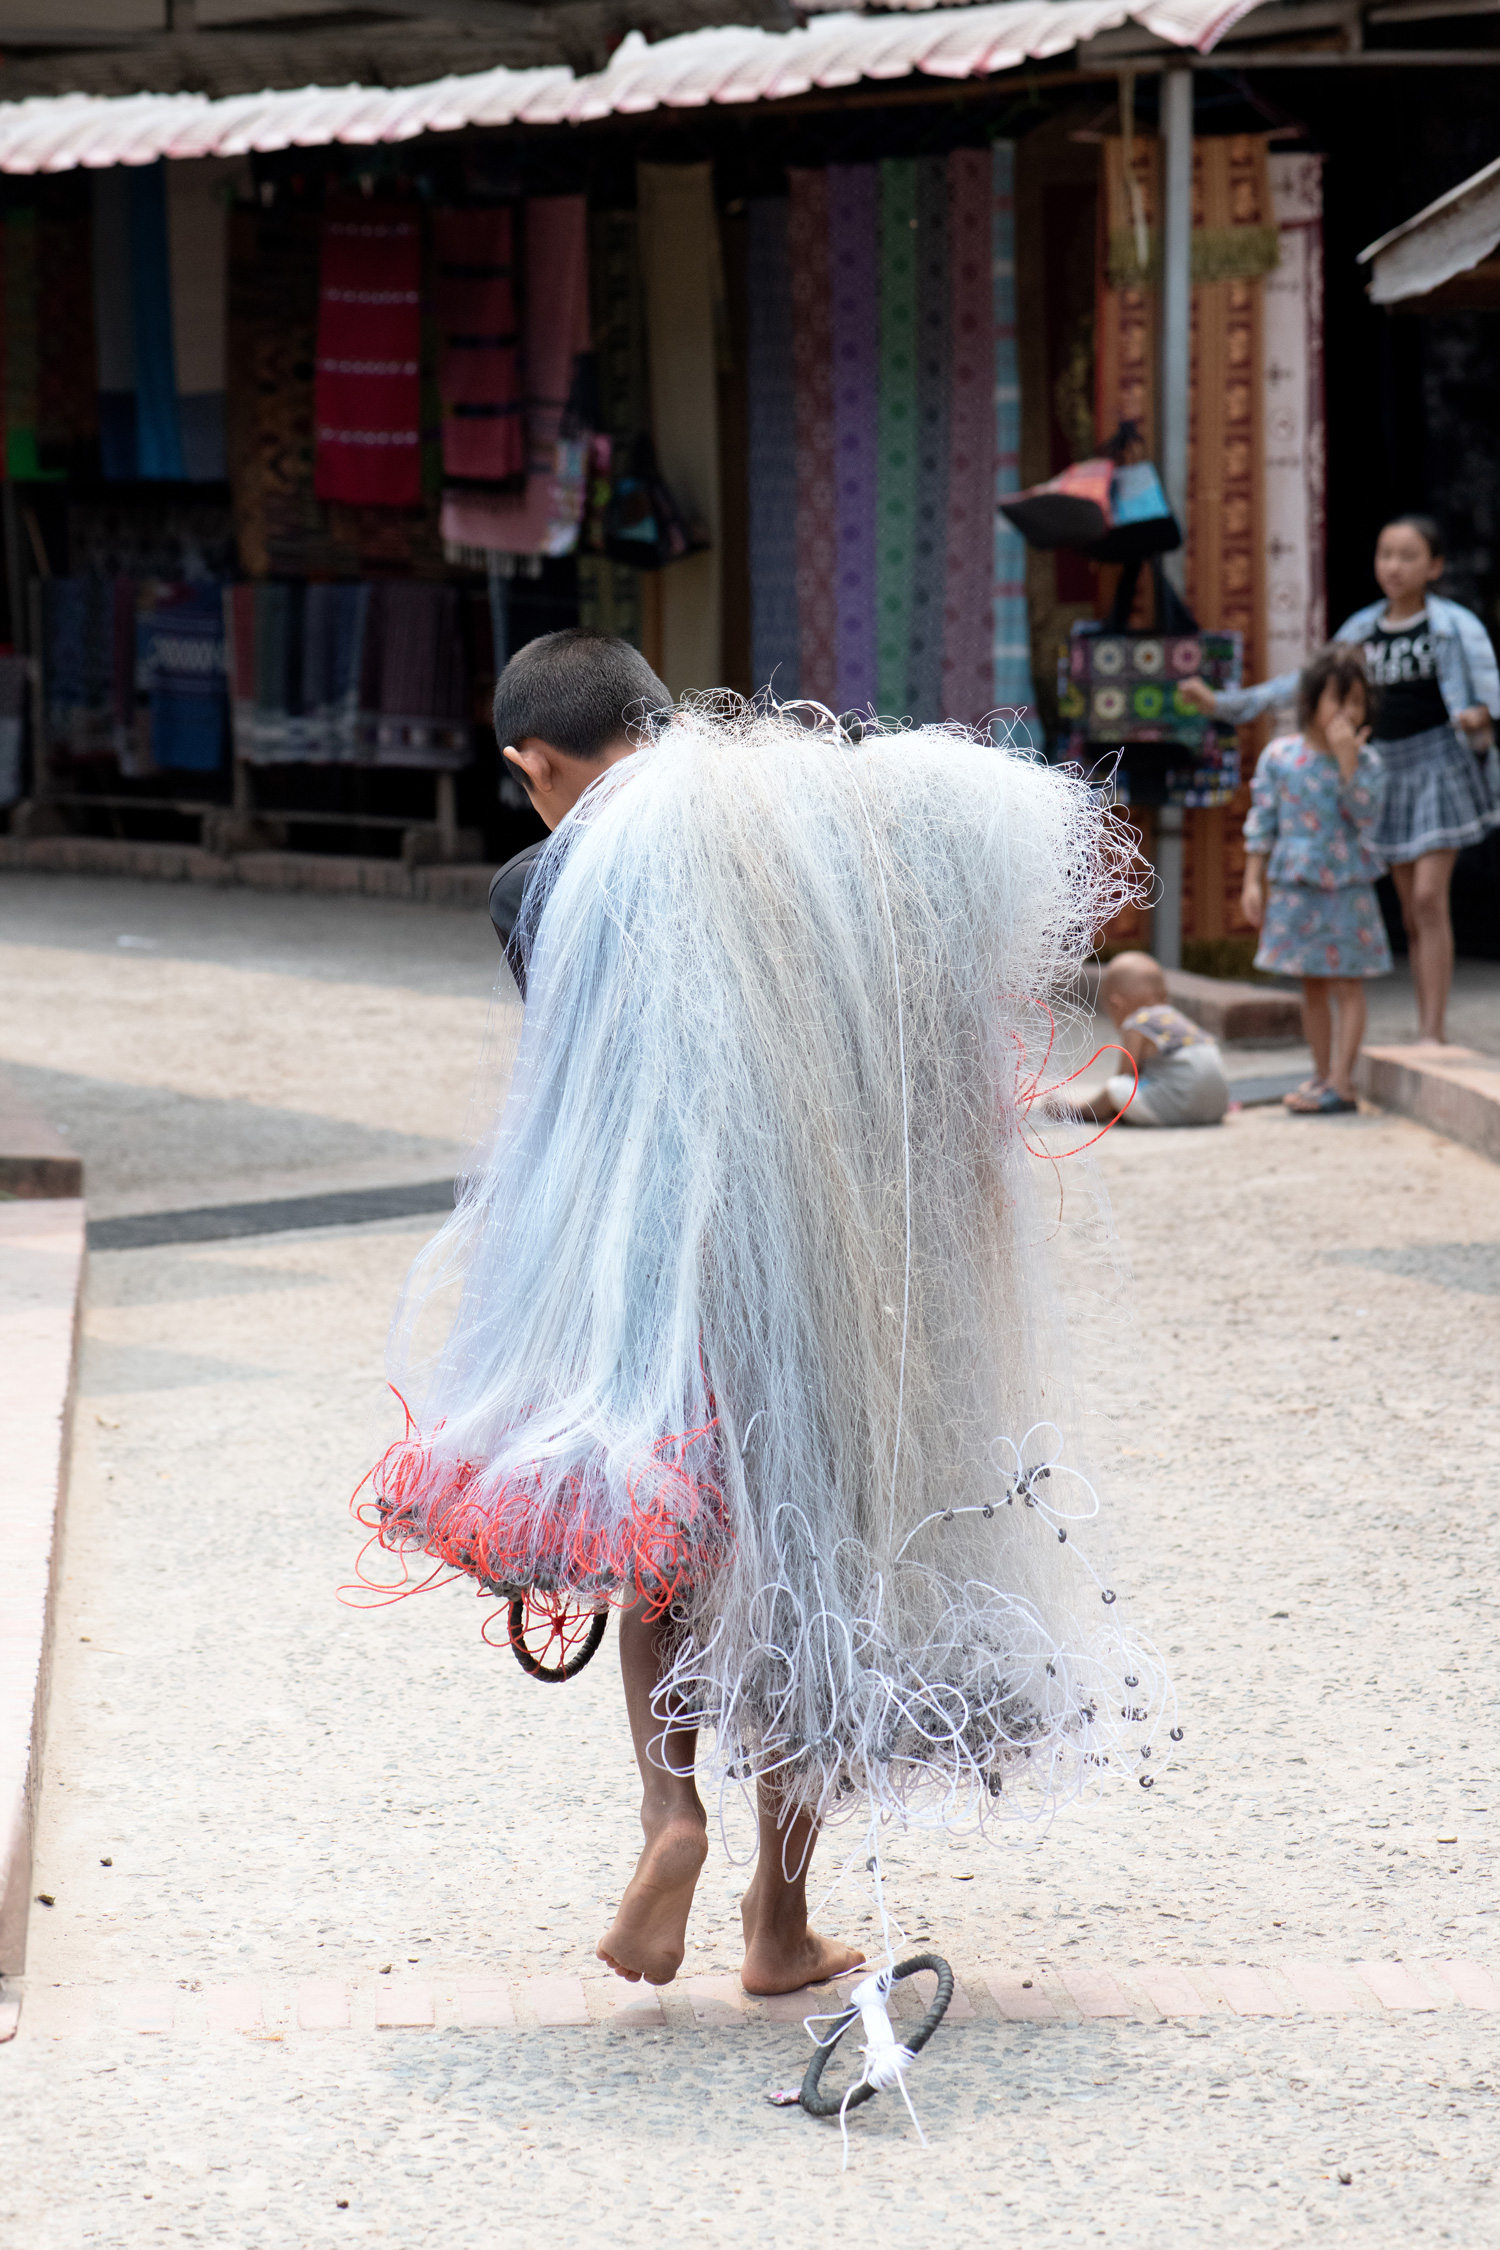 a boy walking down a street with a large net